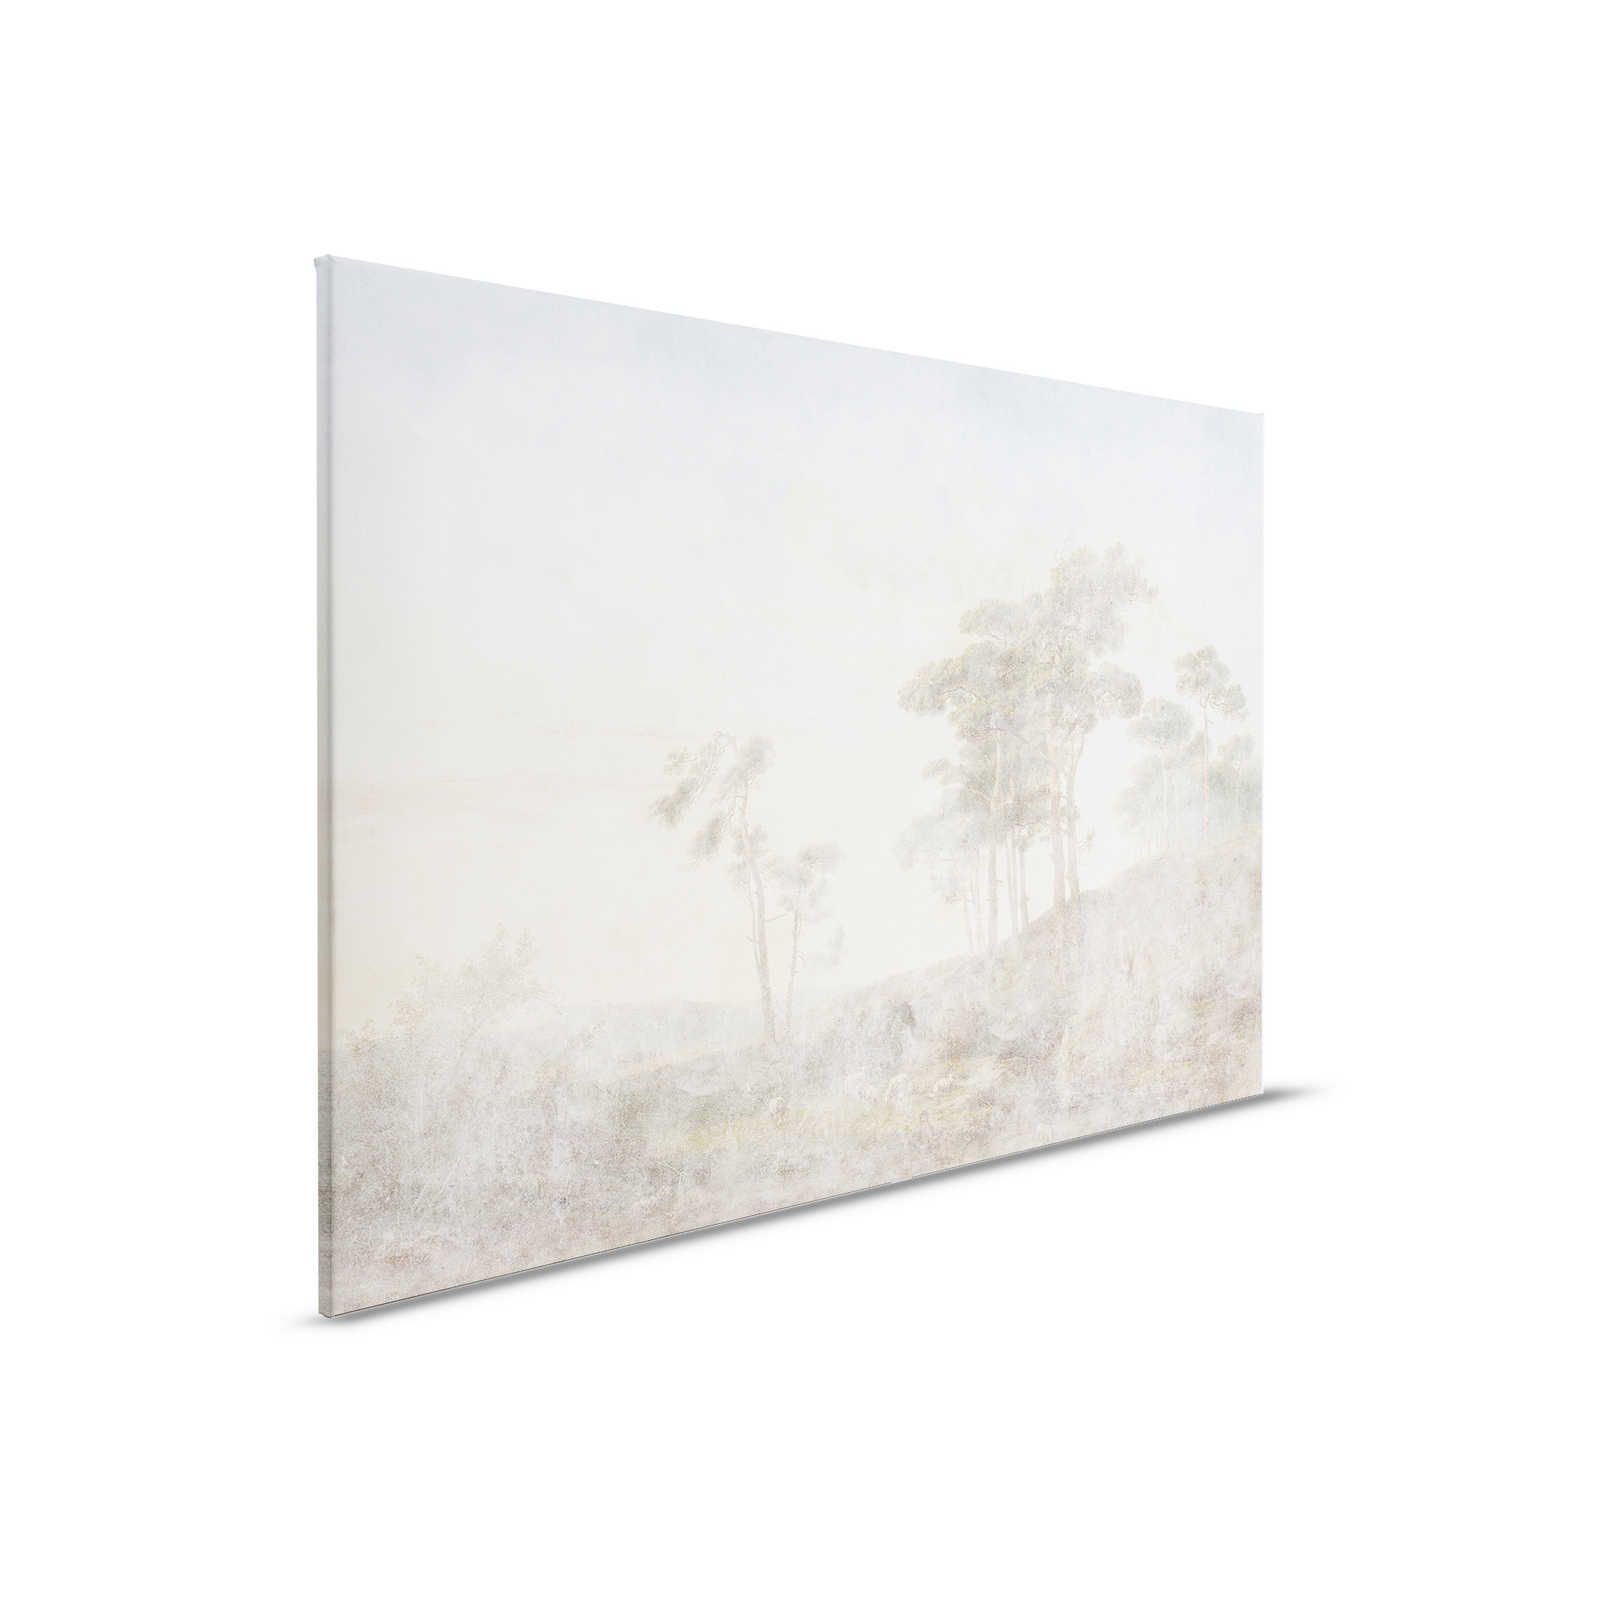 Romantic Grove 1 - Painting Canvas Faded Used Look - 0.90 m x 0.60 m
